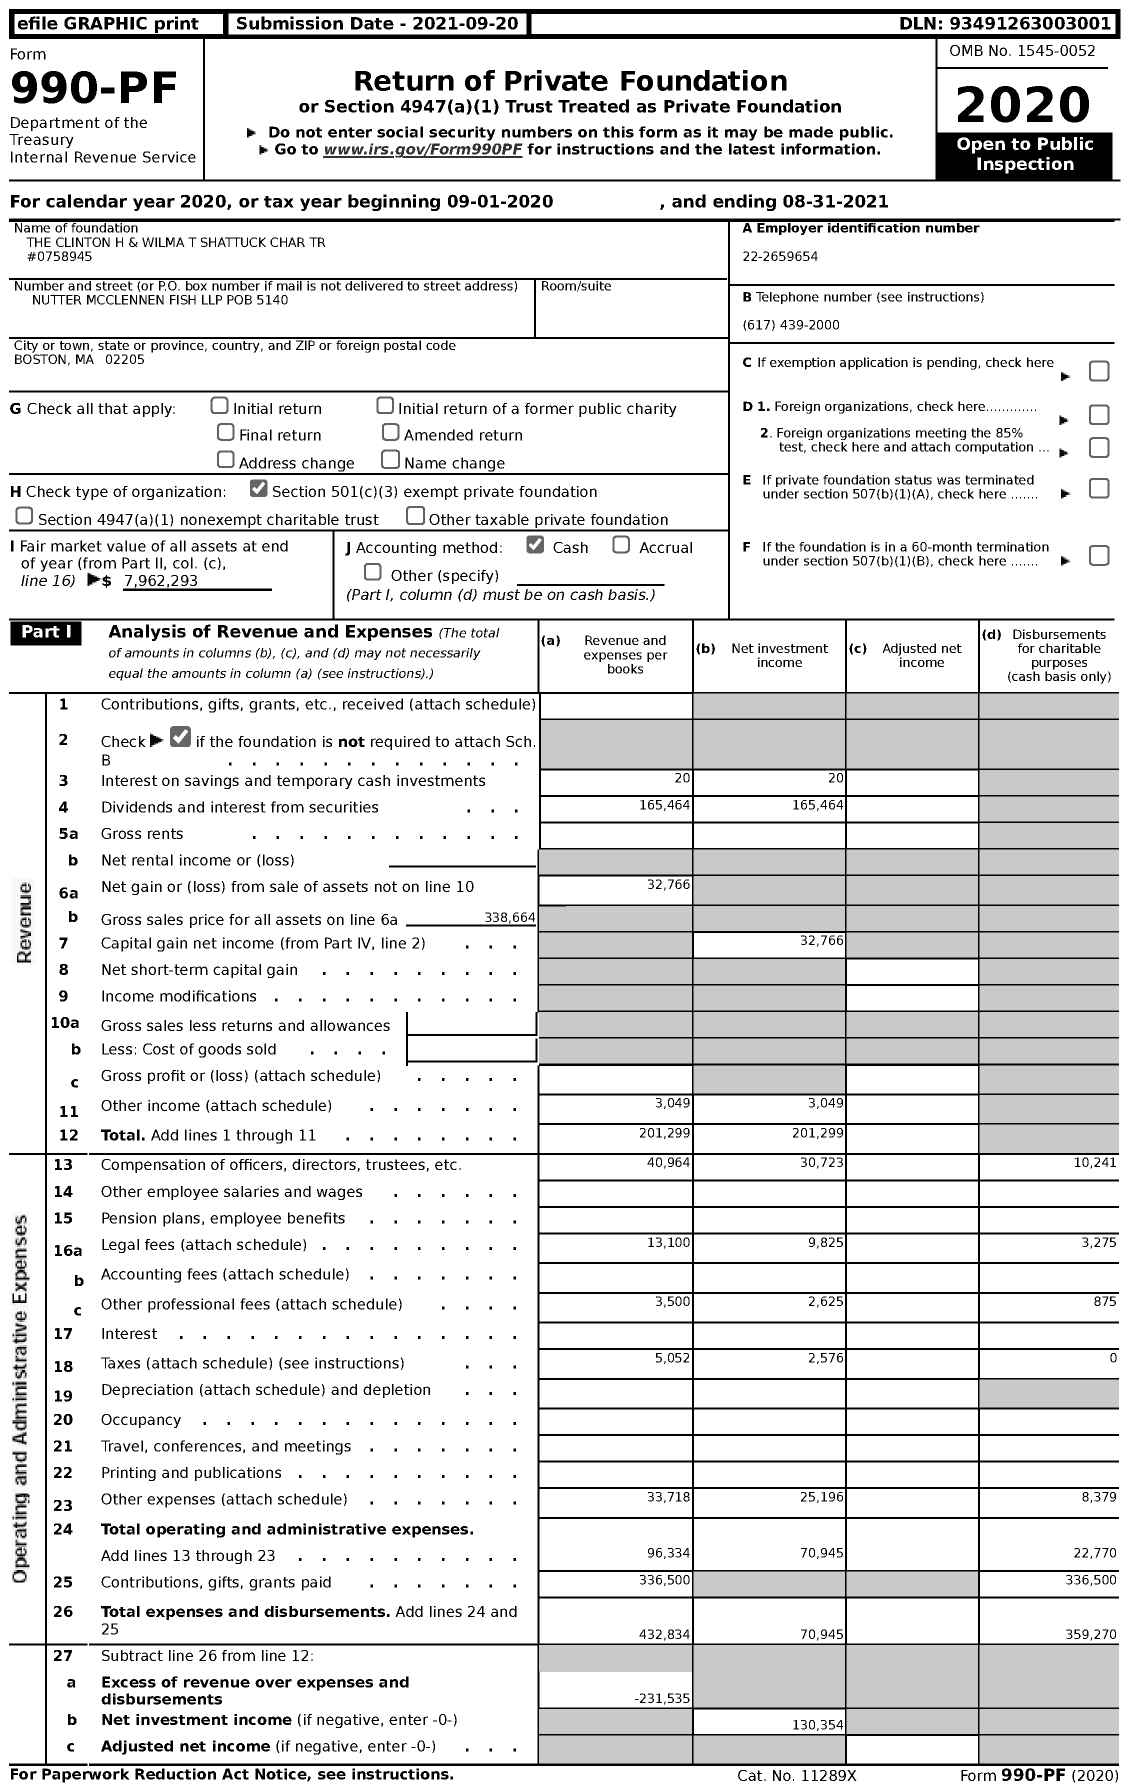 Image of first page of 2020 Form 990PF for The Clinton H and Wilma T Shattuck Charitable Trust #0758945